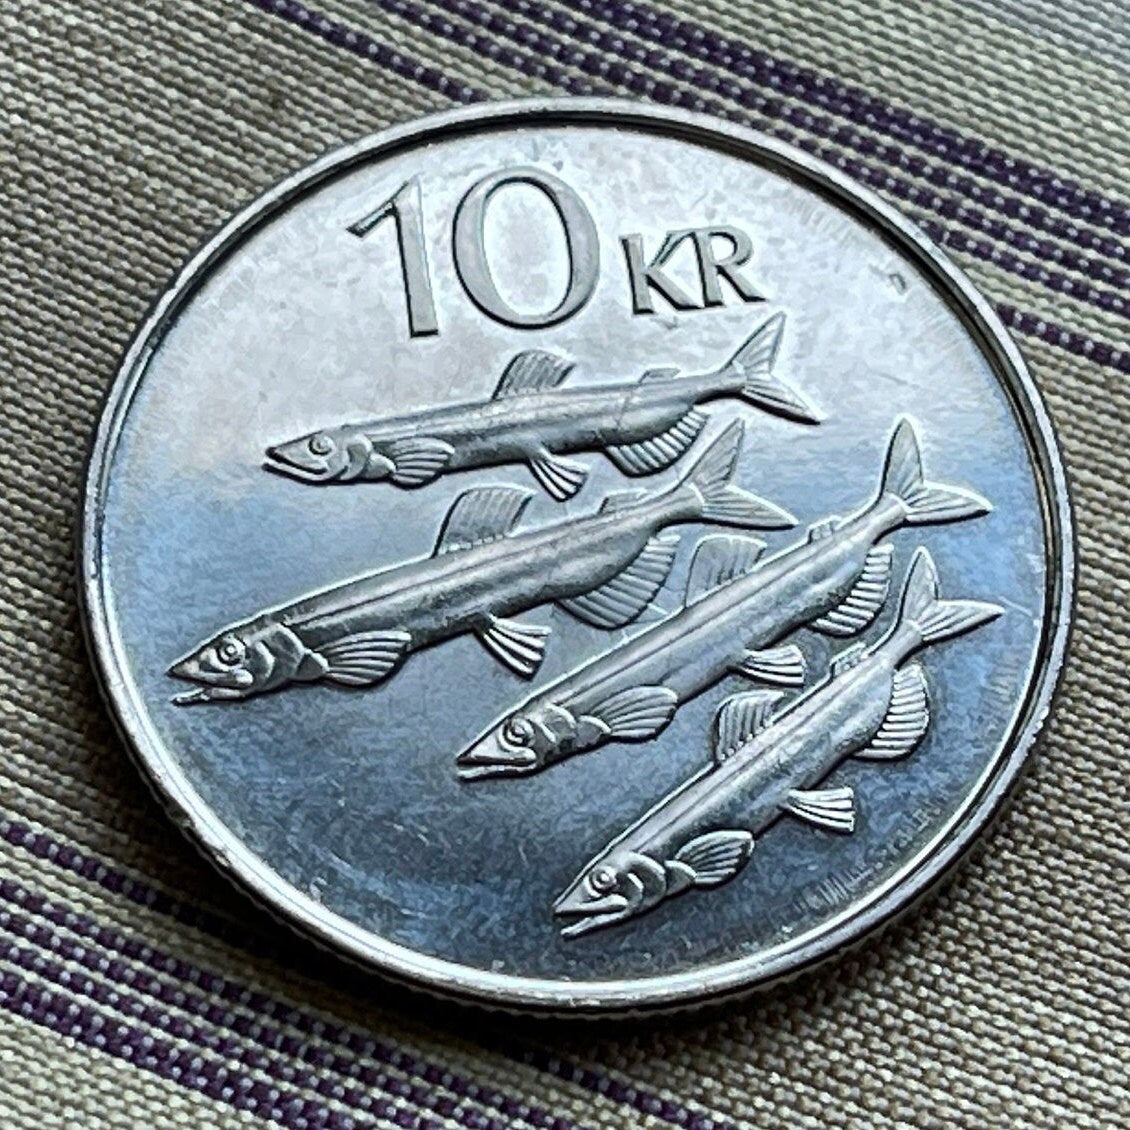 Landvaettir Protector Spirits & Capelin Fish 10 Kronur Iceland Authentic Coin Money for Jewelry and Craft Making (Smelt)